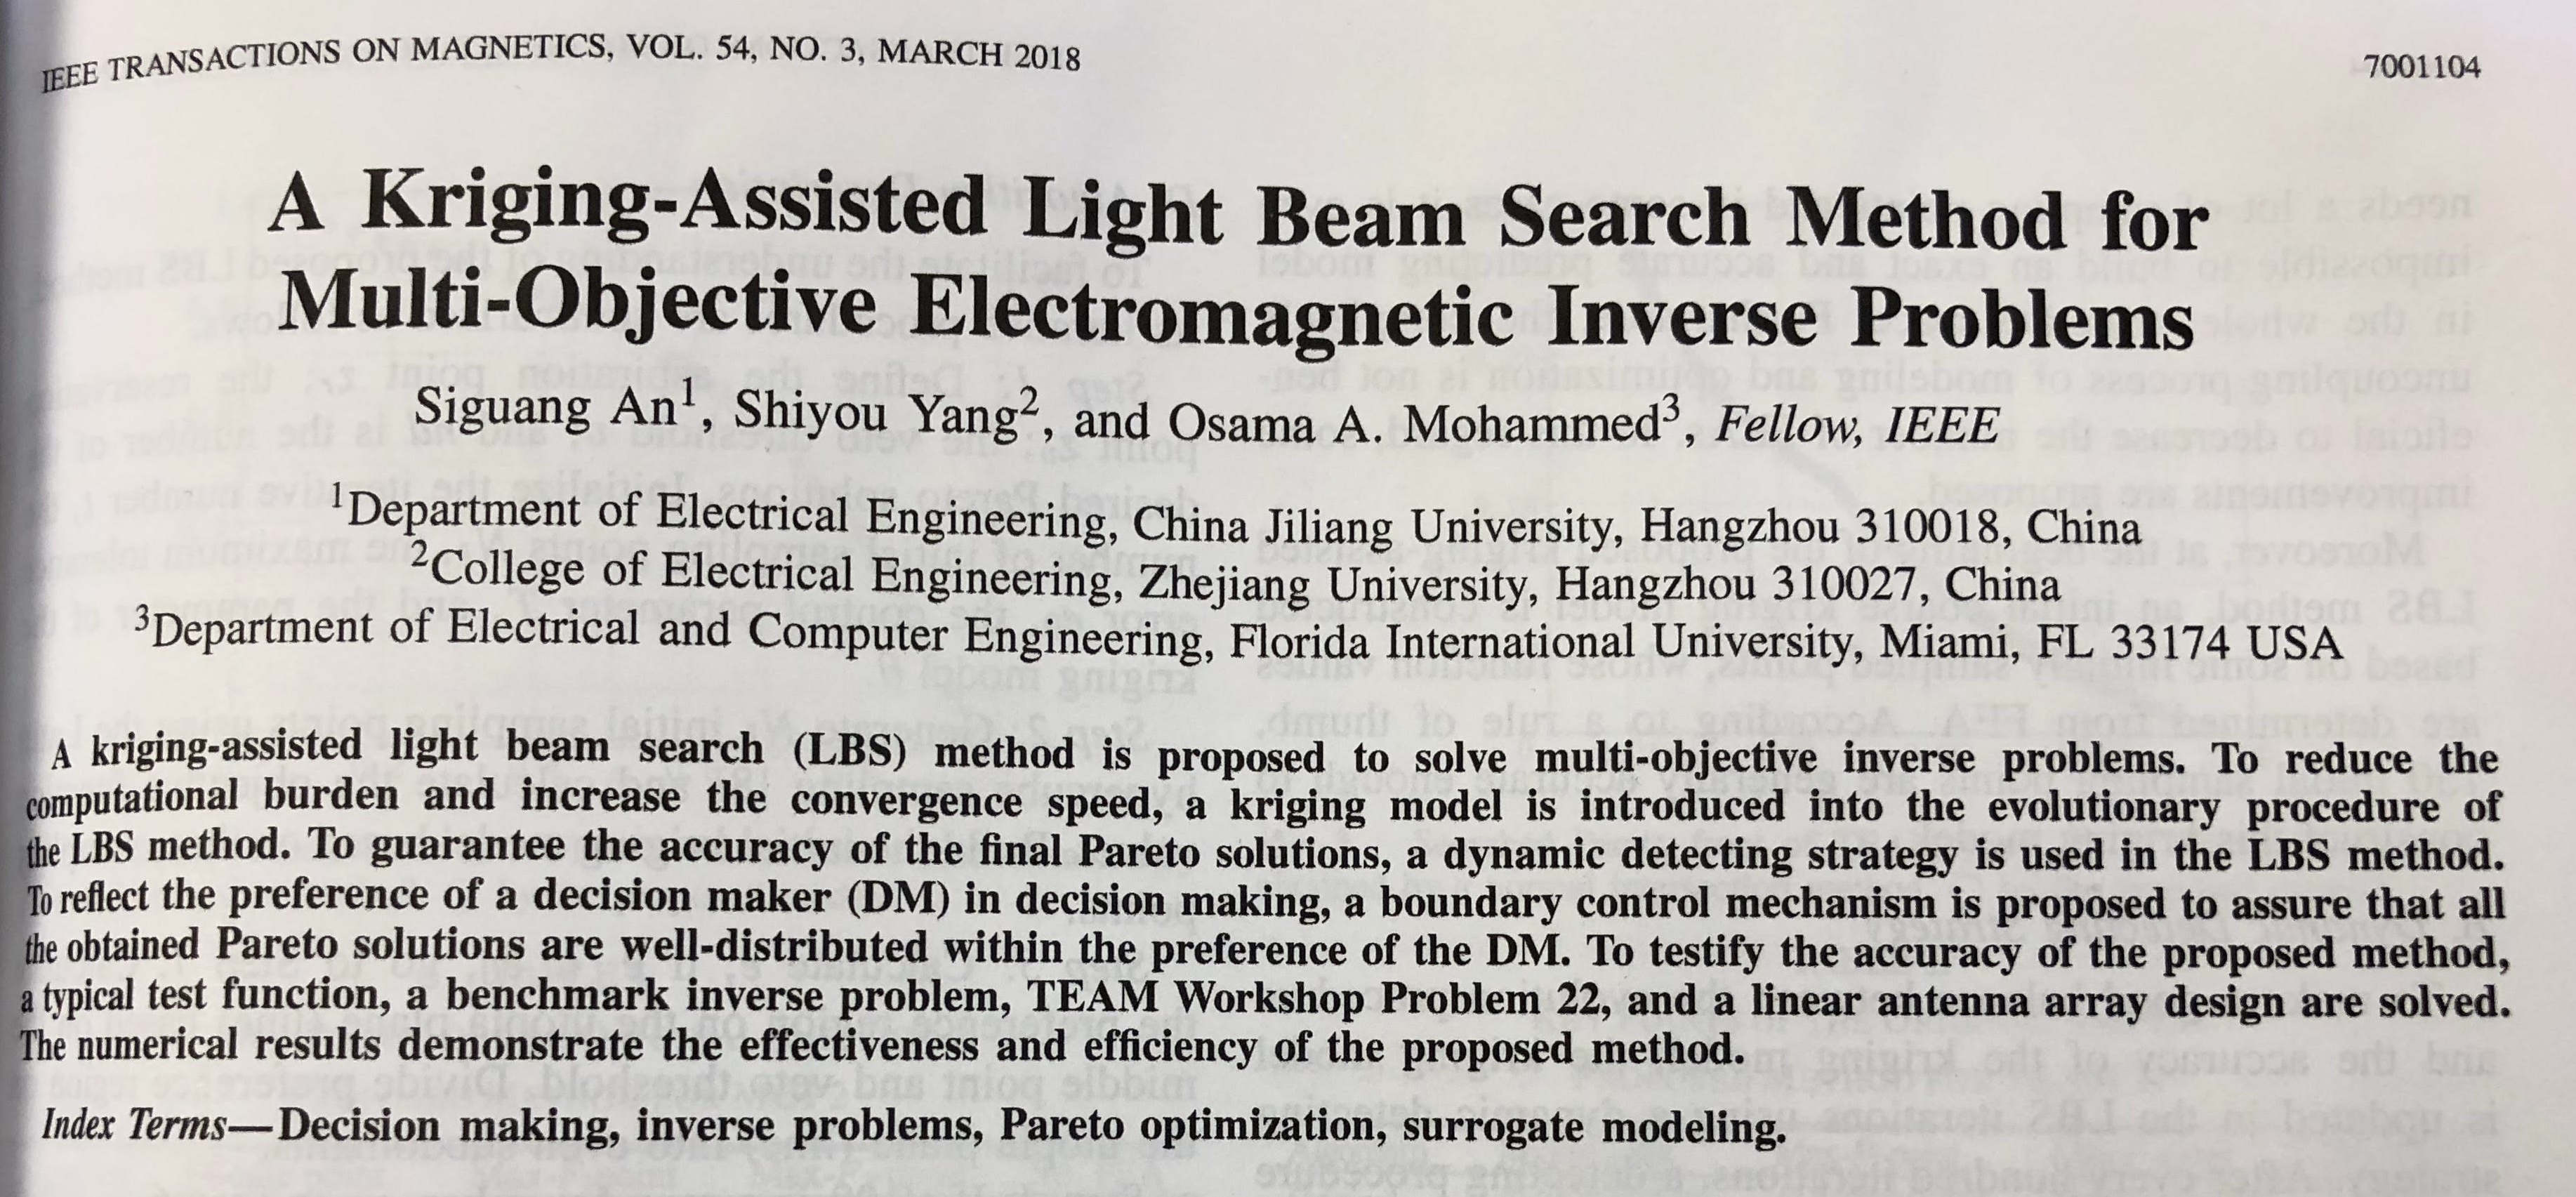 A Kriging-Assisted Light Beam Search Method for Multi-Objective Electromagnetic Inverse Problems